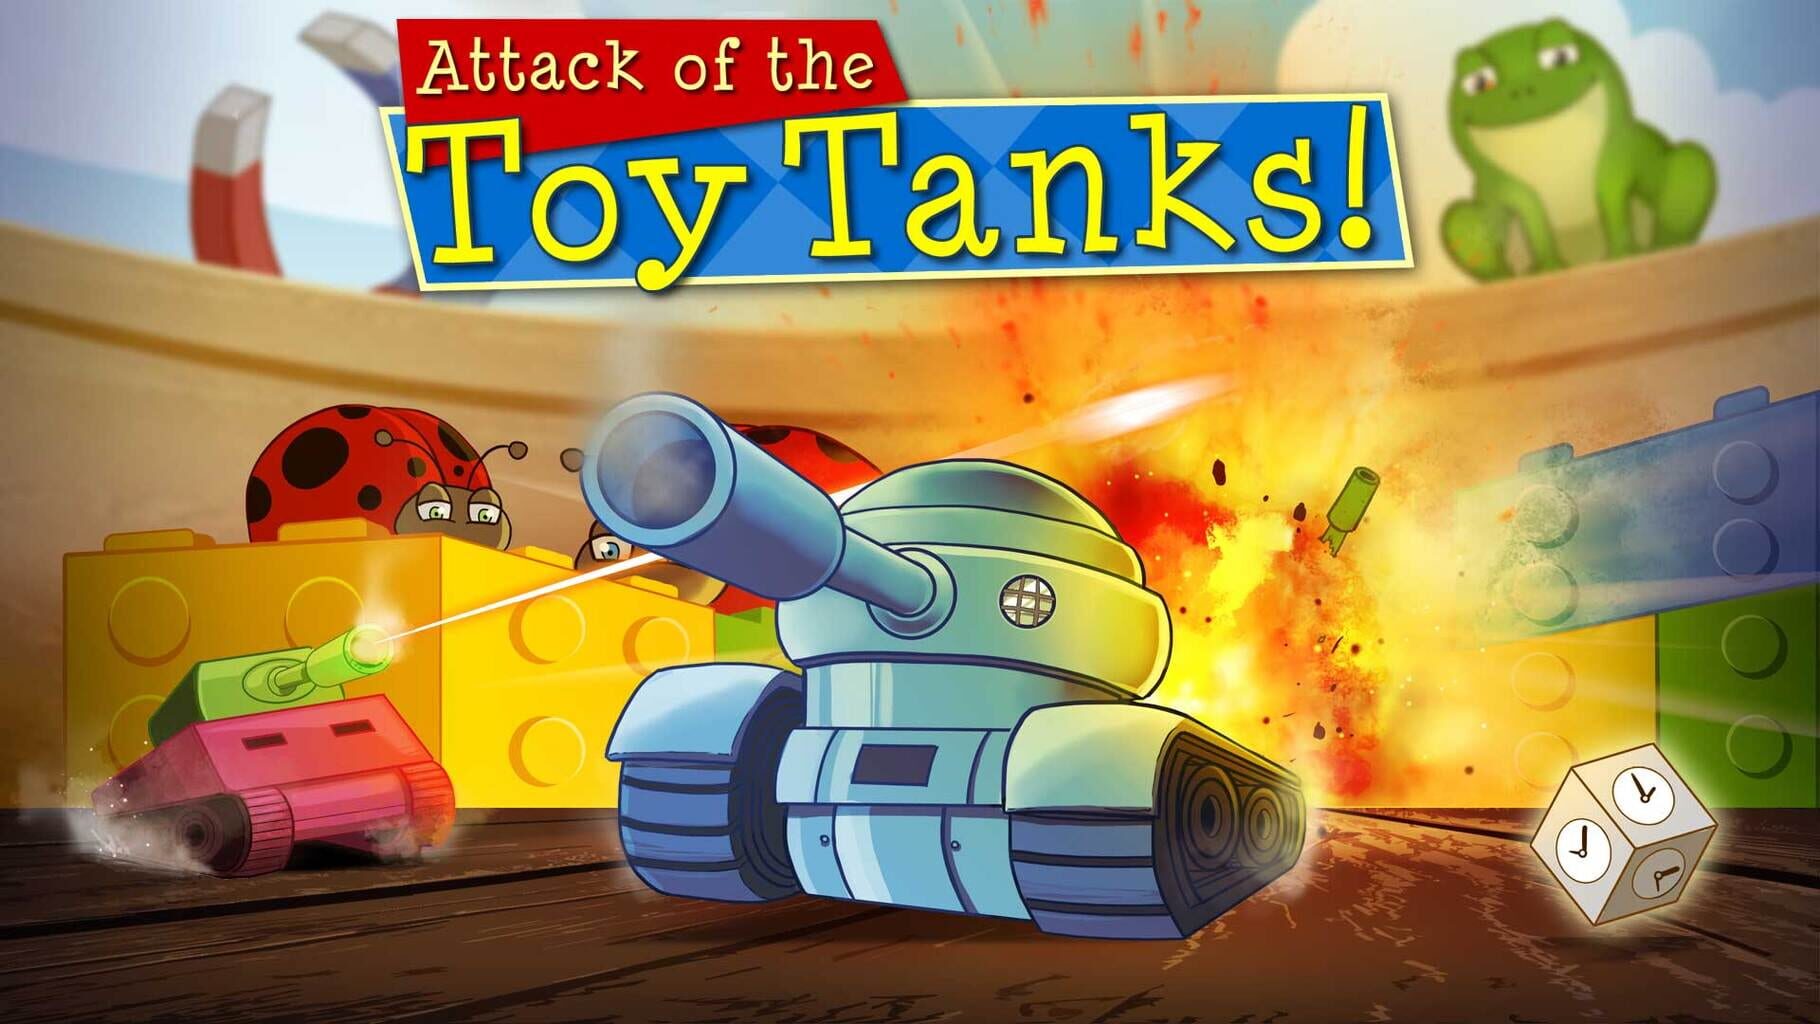 Attack of the Toy Tanks artwork